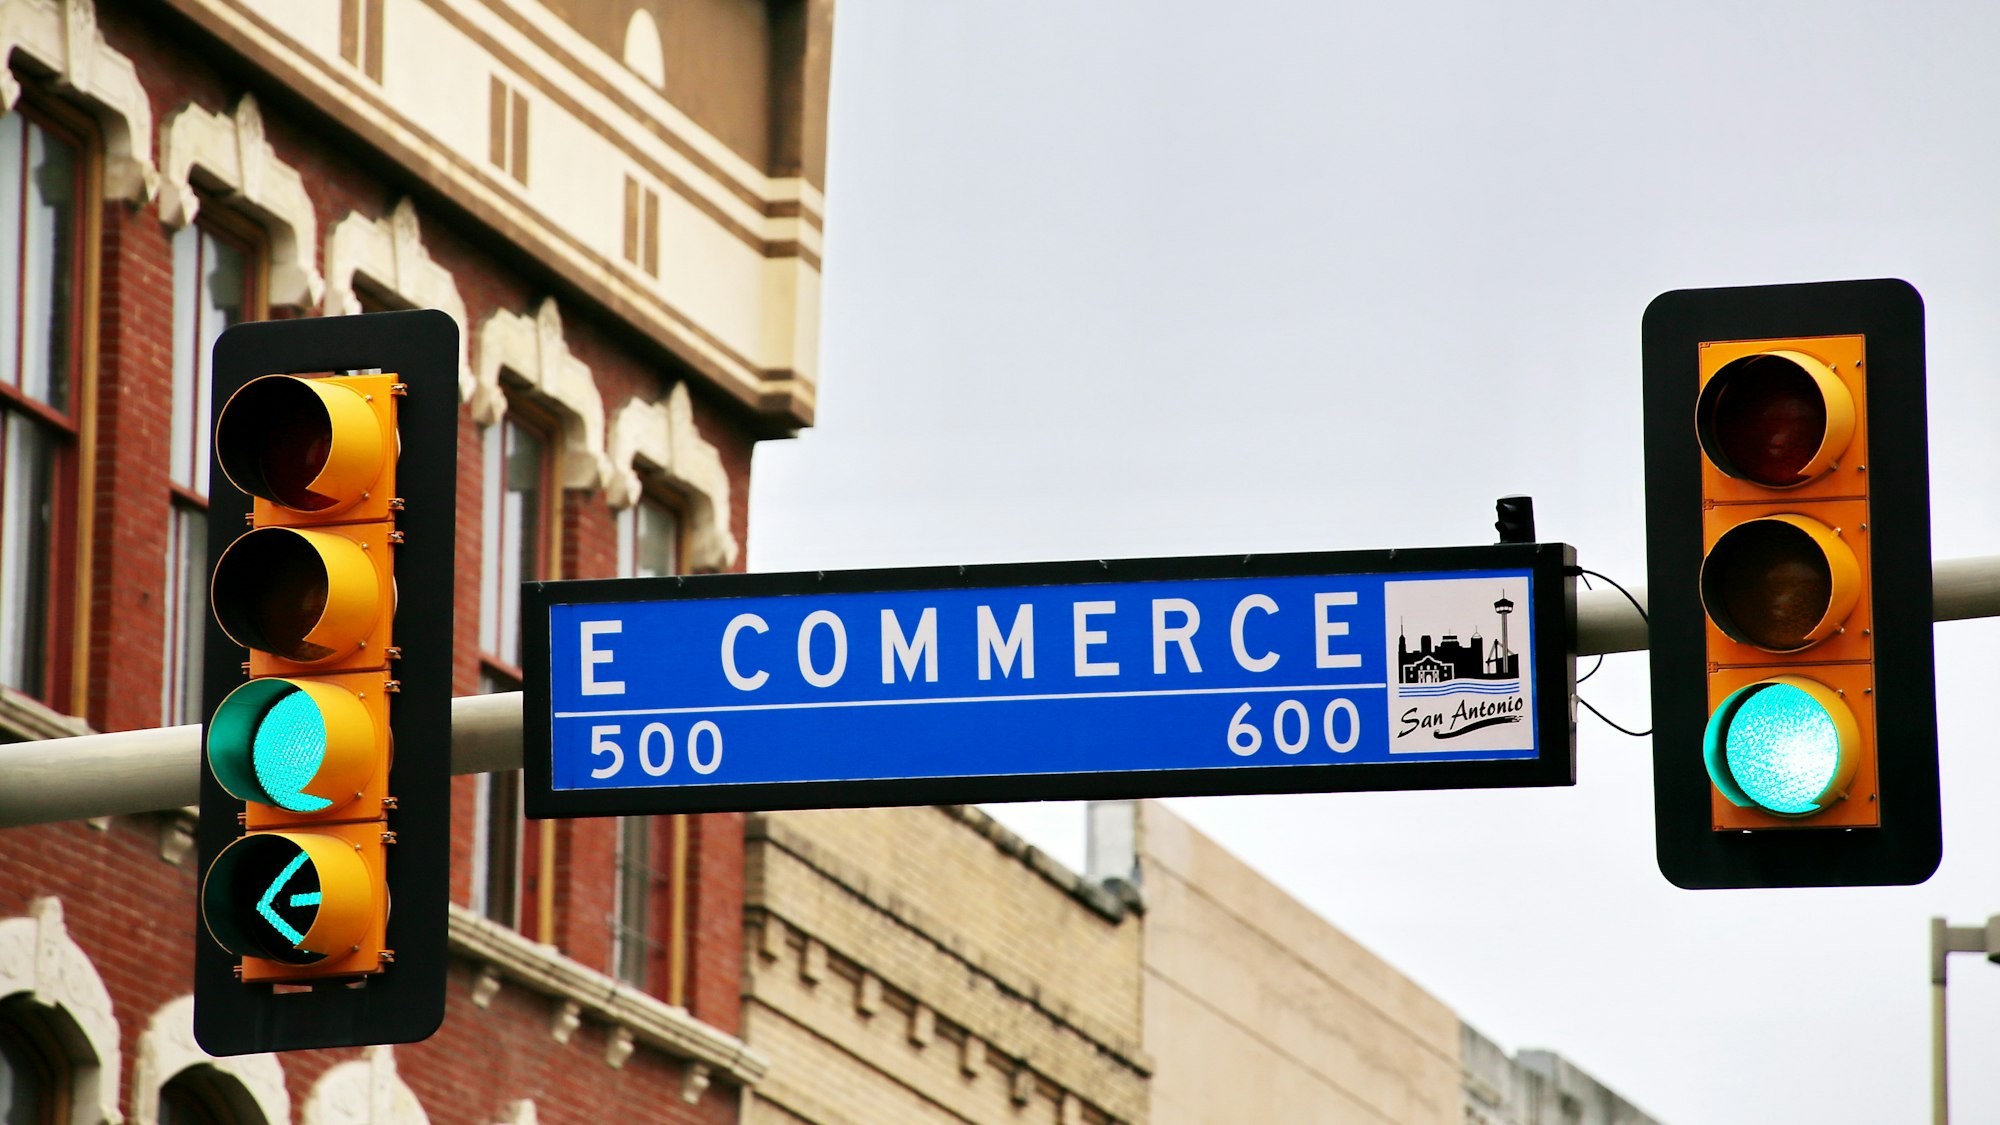 All signs on green for e-commerce? No, just East Commerce Street in San Antonio.

Tip: there is also a E Commerce Street sign available with red lights (see my photo line).